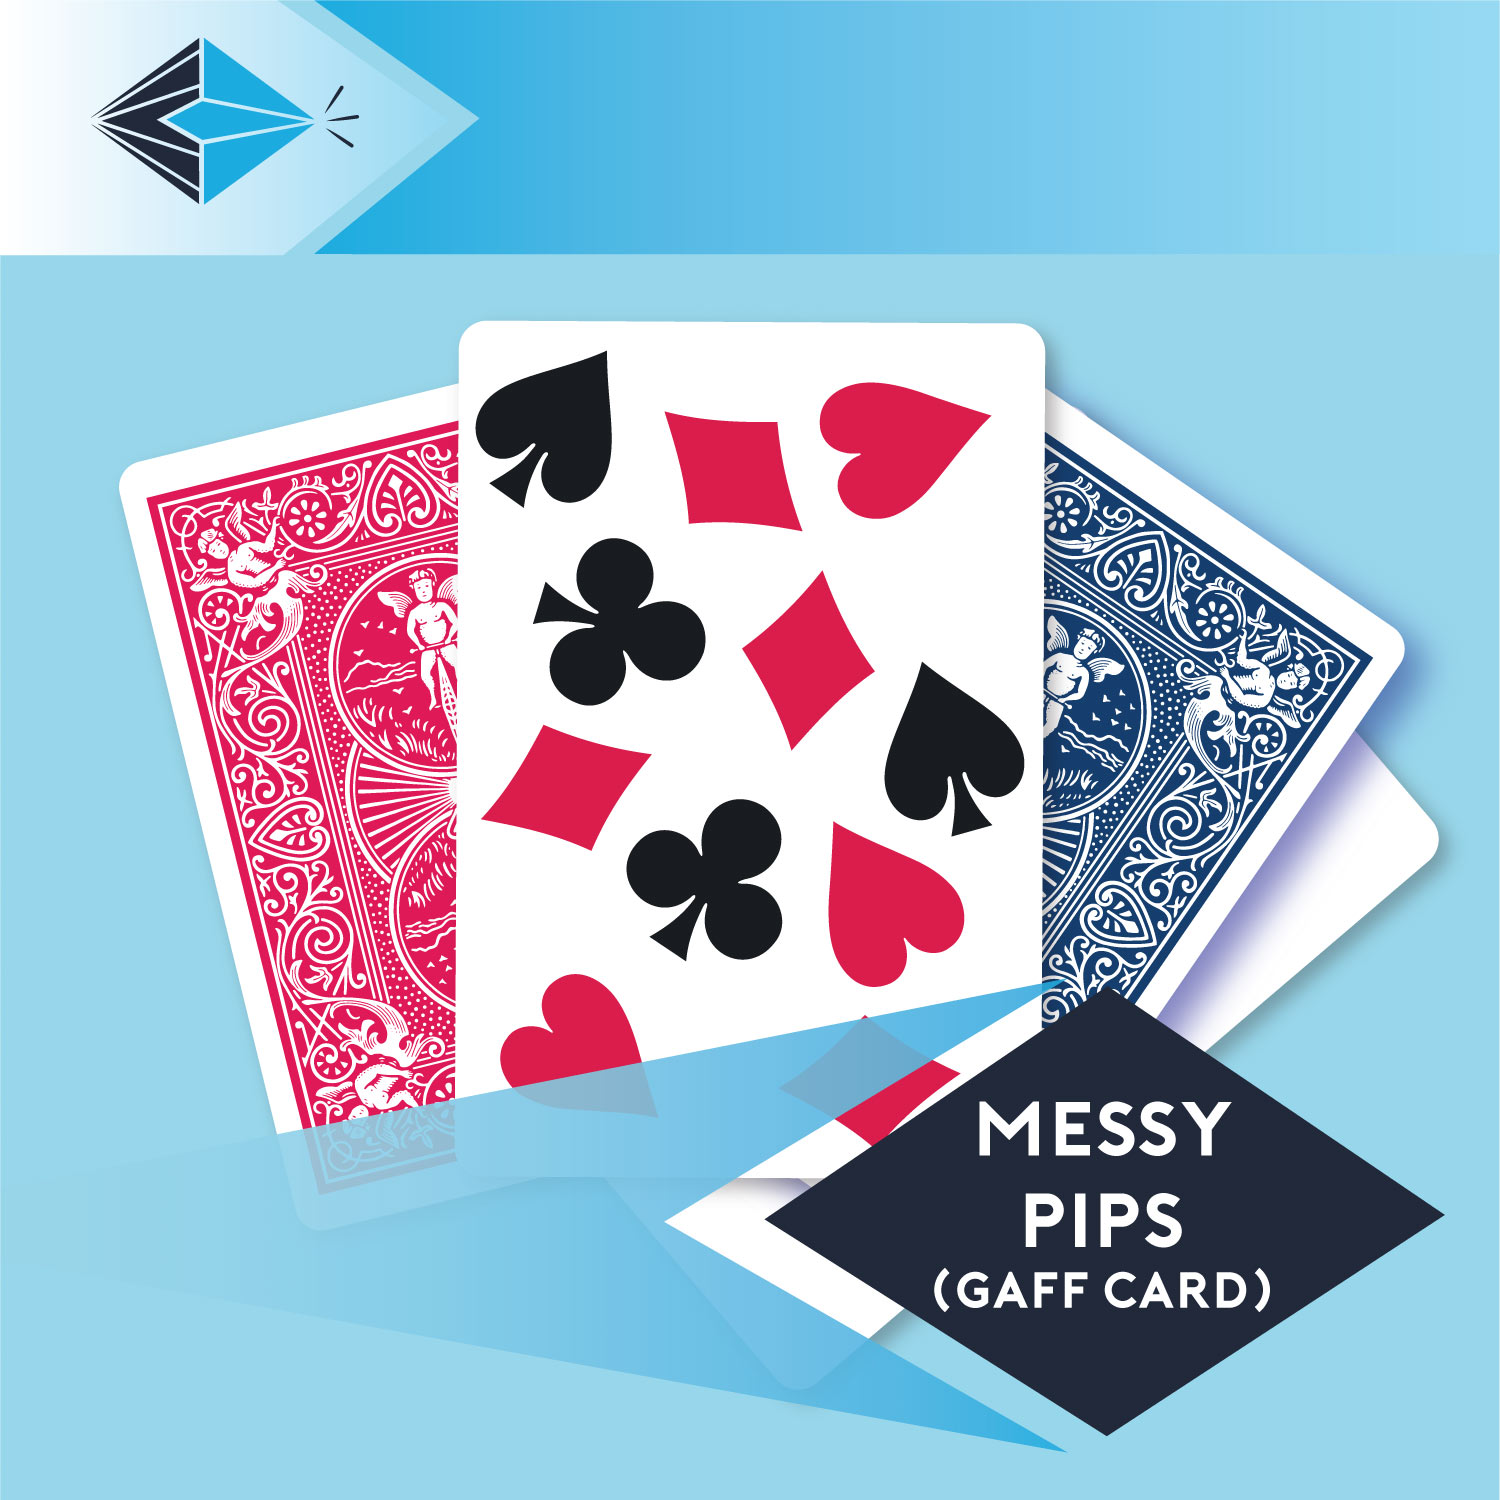 Messy Pips gaff card 26 playing card for magicians printing printers Stockport Manchester UK